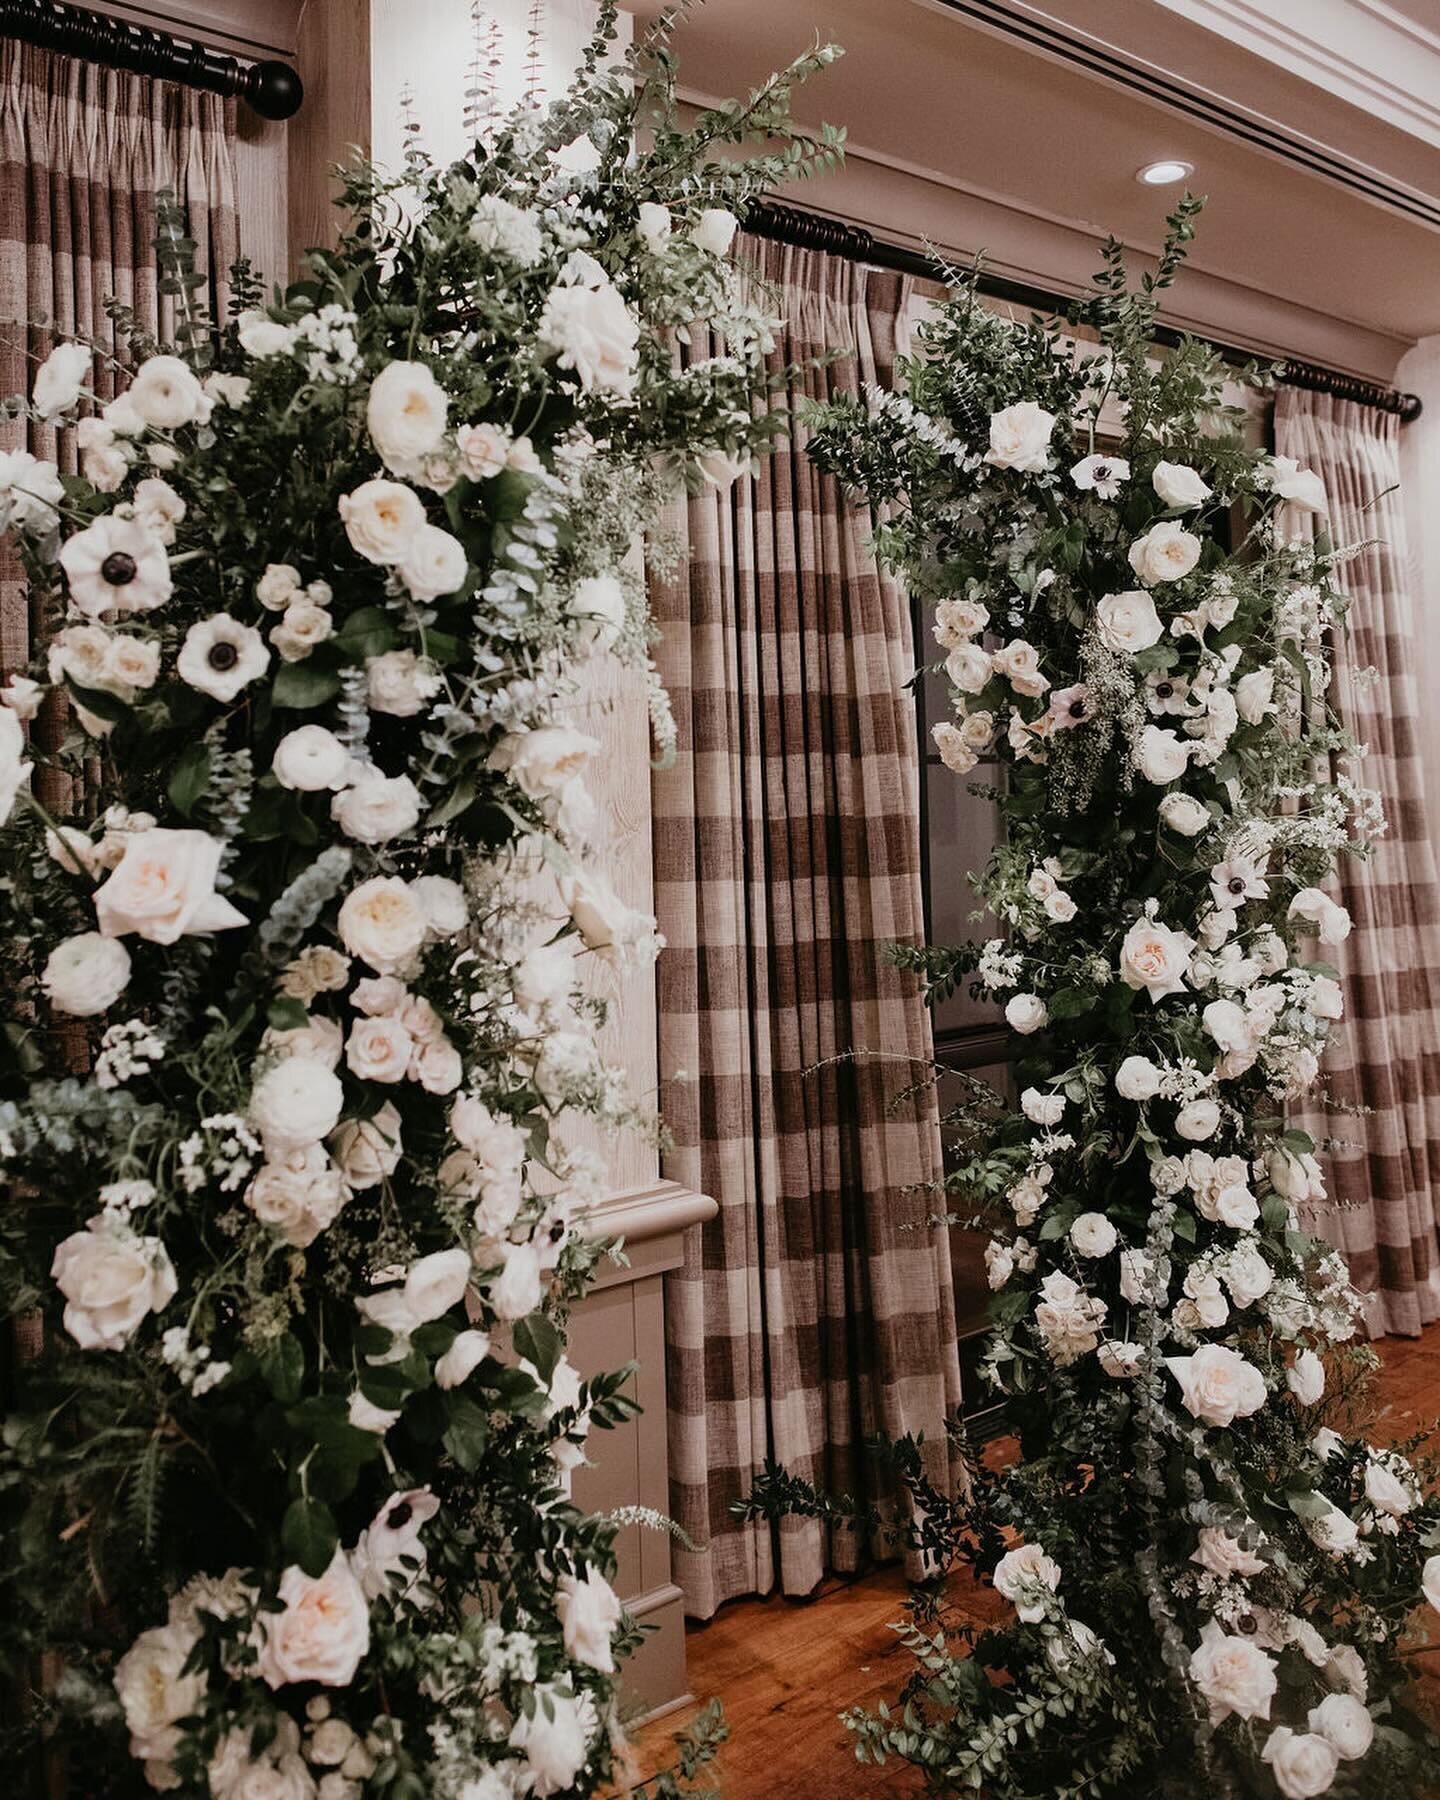 We can&rsquo;t get enough of these florals from a chilly winter, new years wedding. 🩷

YOU are the center of everything we do!

Venue:  @taconichotel 
Wedding Planning: @candicegrace_events 
Photography:  @joevogelphoto 
Entertainment: @802events 
F